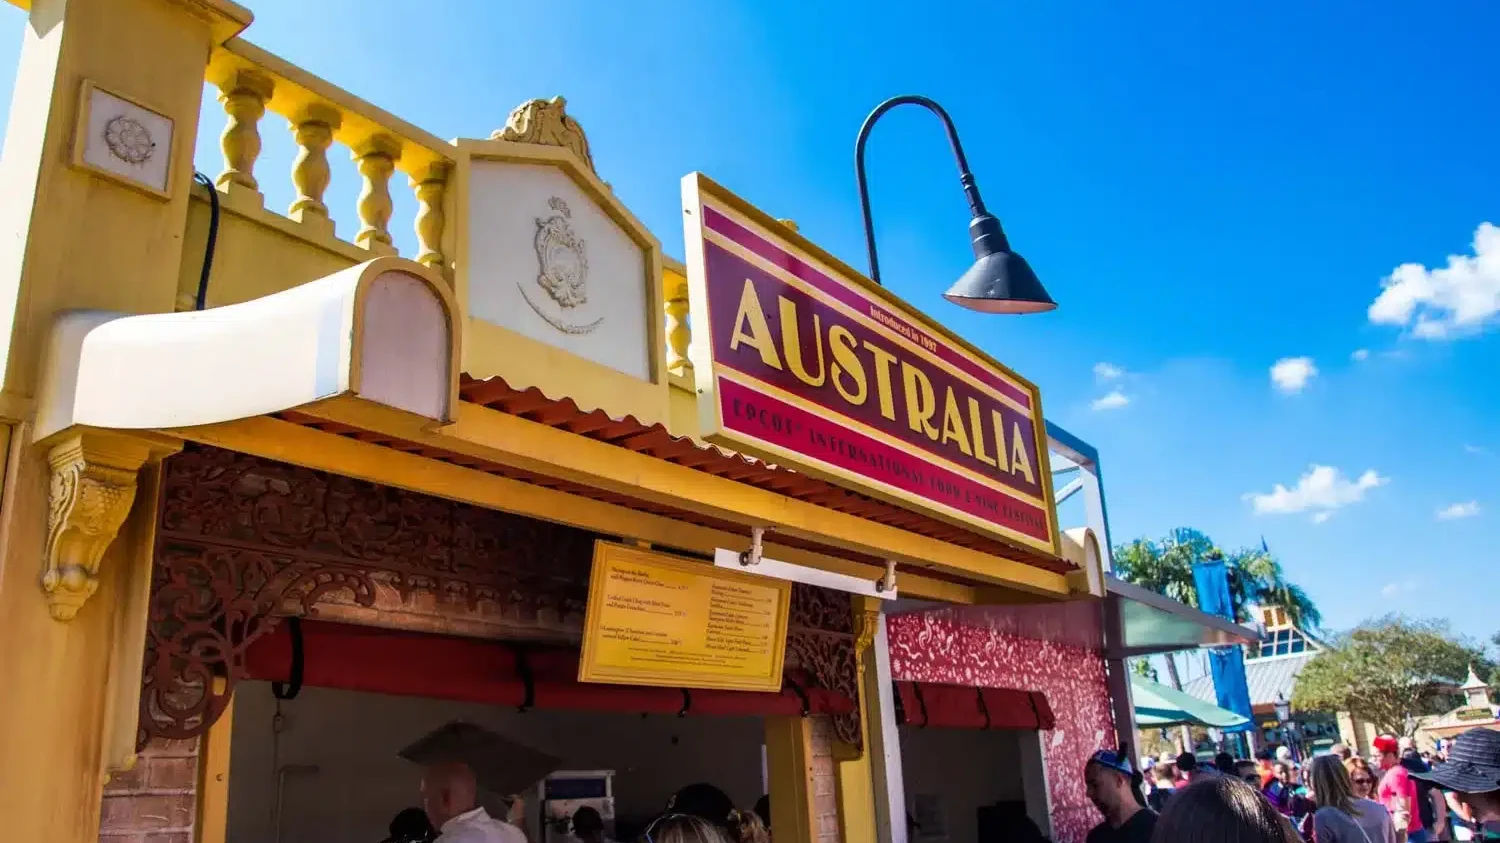 Outside of the Australia Food Booth at the EPCOT Food & Wine Festival at Disney World